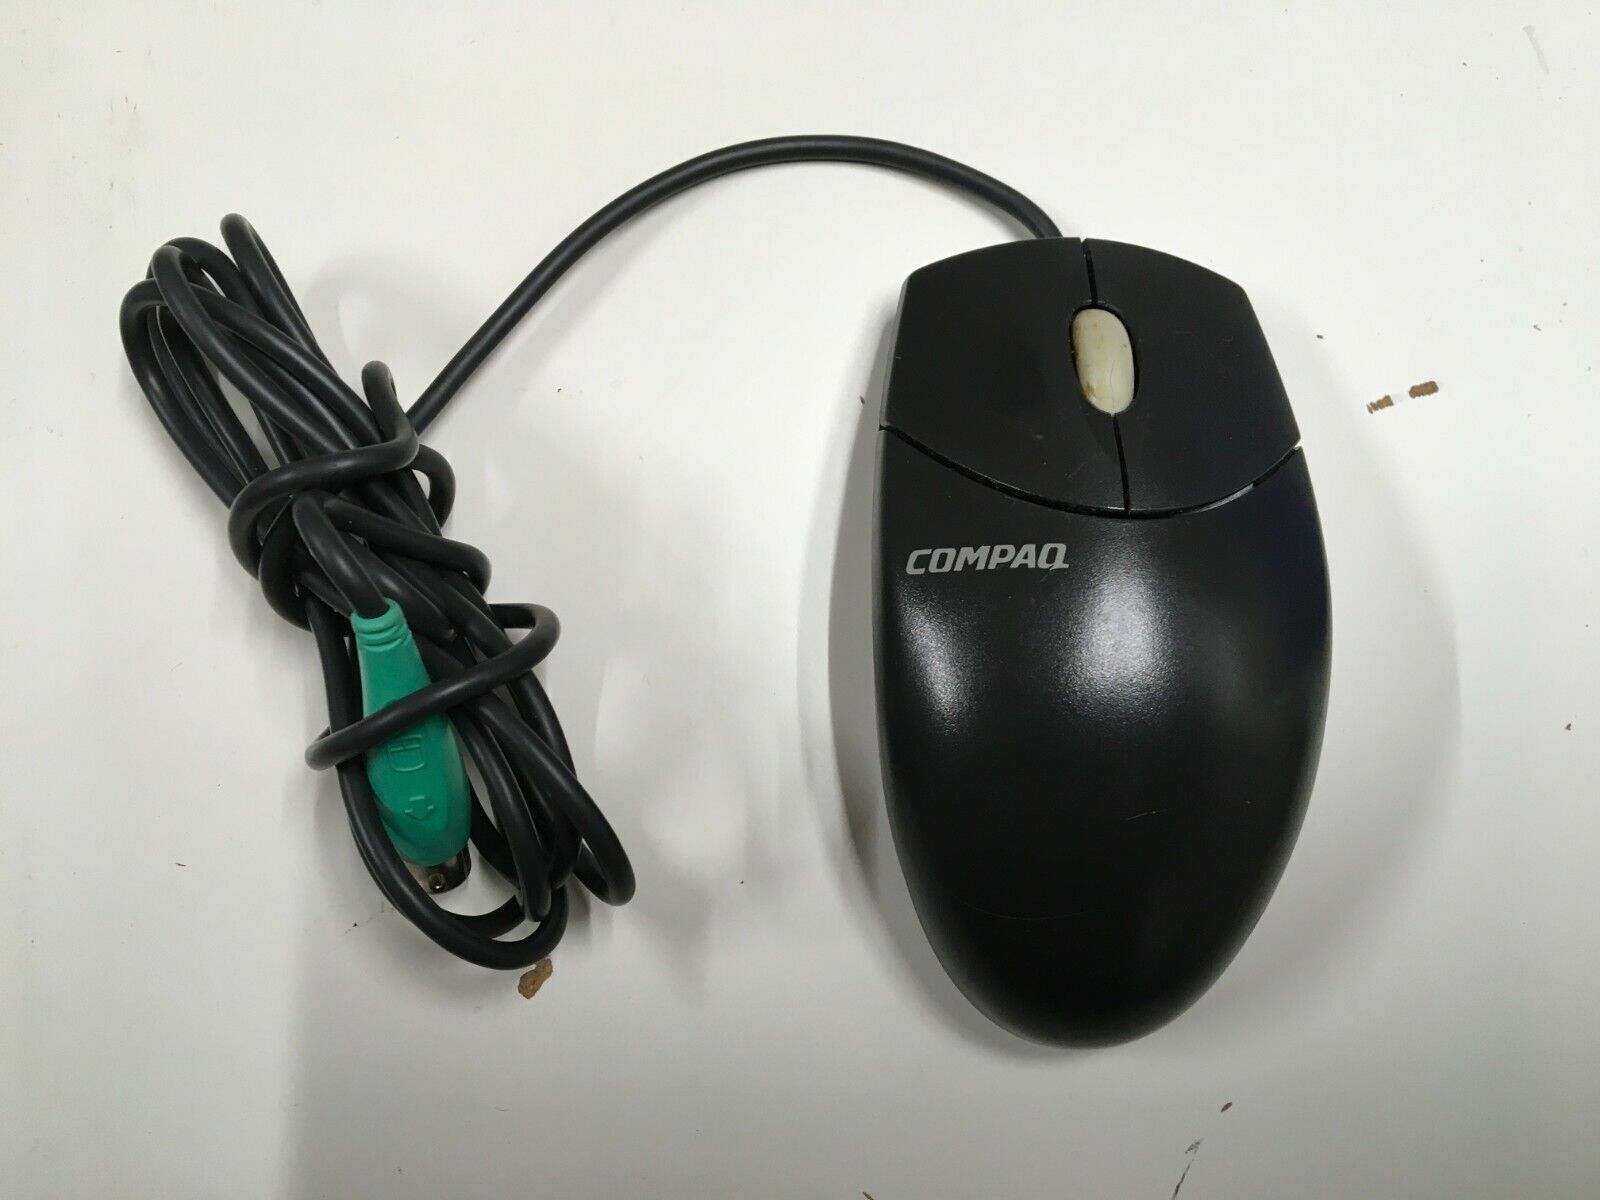 Compaq 334684 - 108 2-Button Scroll Mouse PS/2